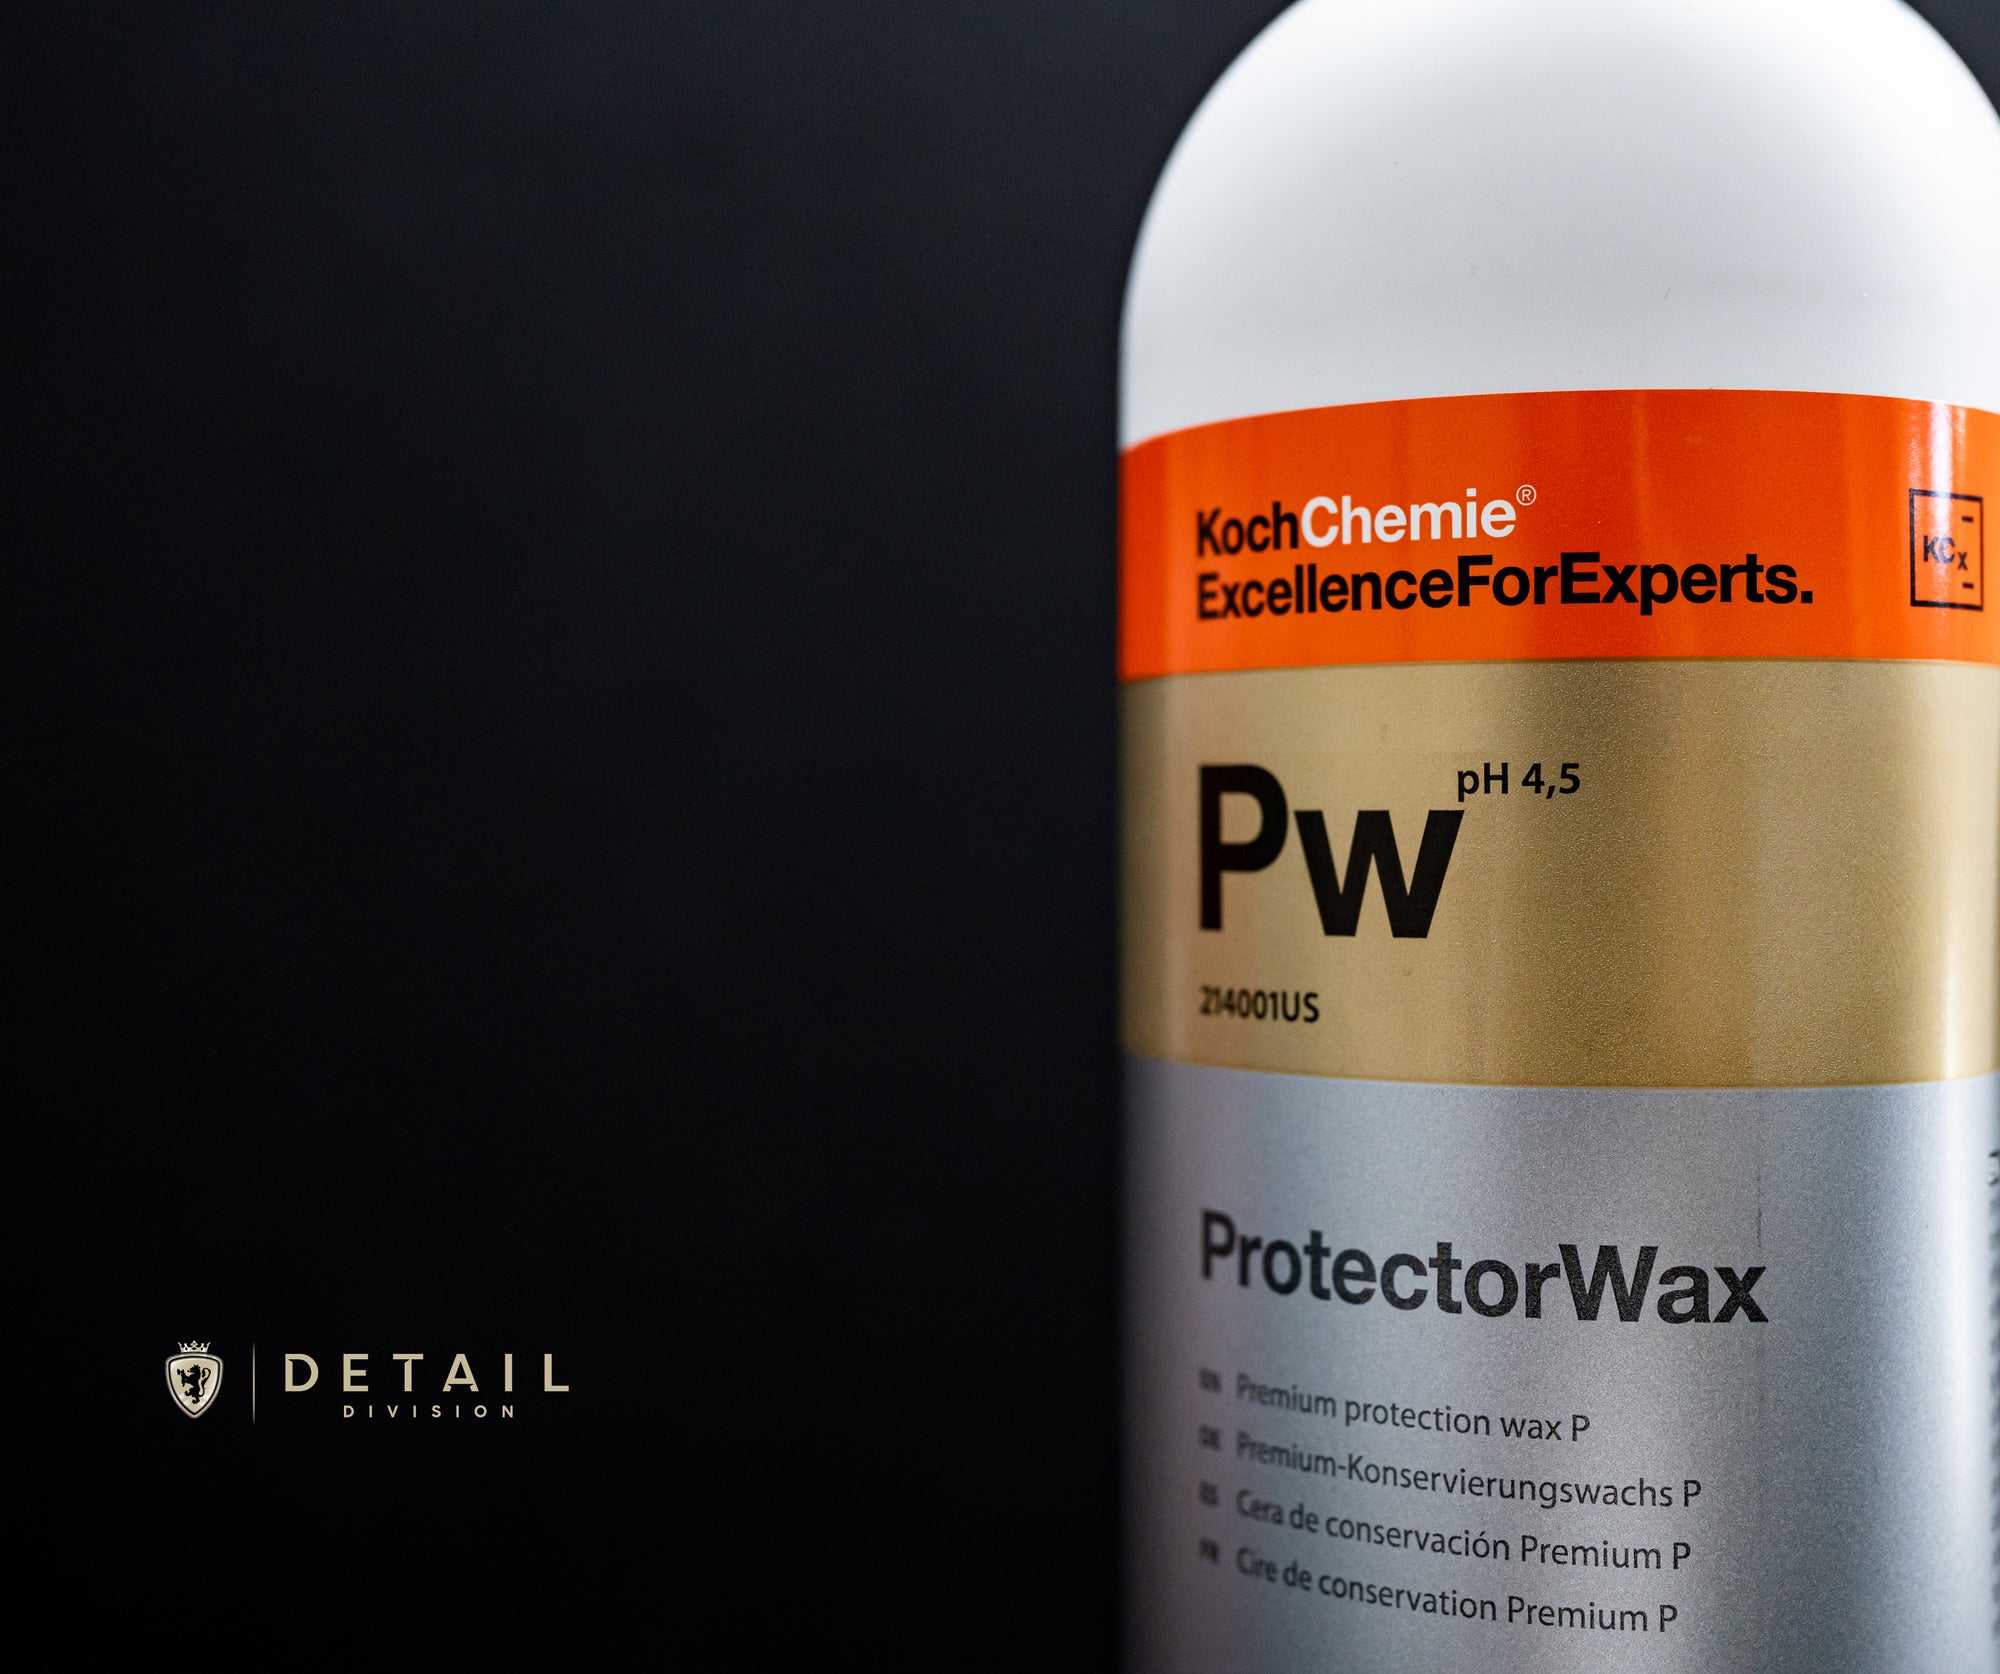 Shampoing pour voiture Wash & Wax 1 L PROTECTON